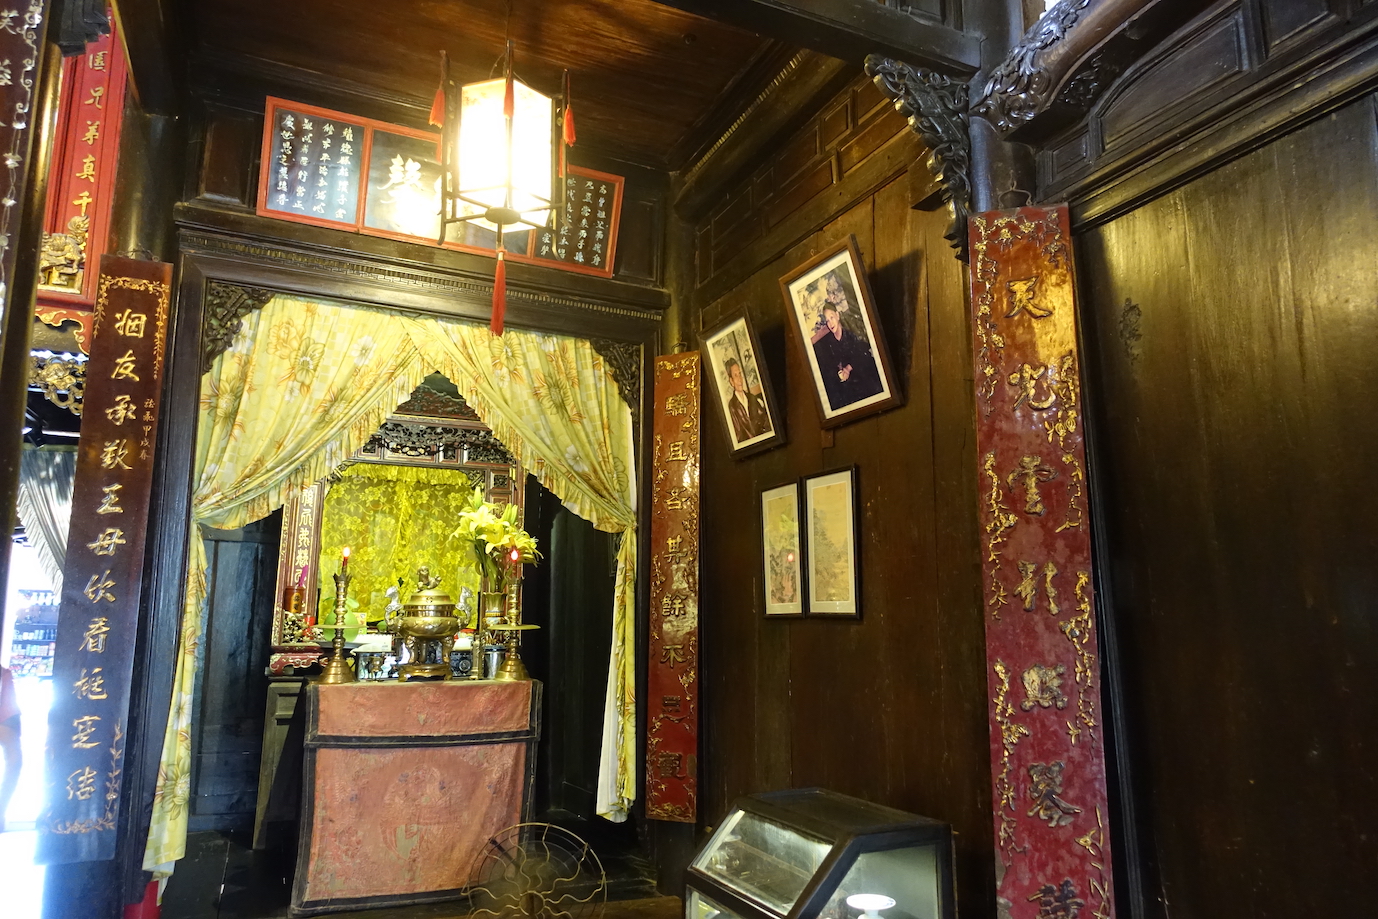 Phung Hung house in Hoi An center